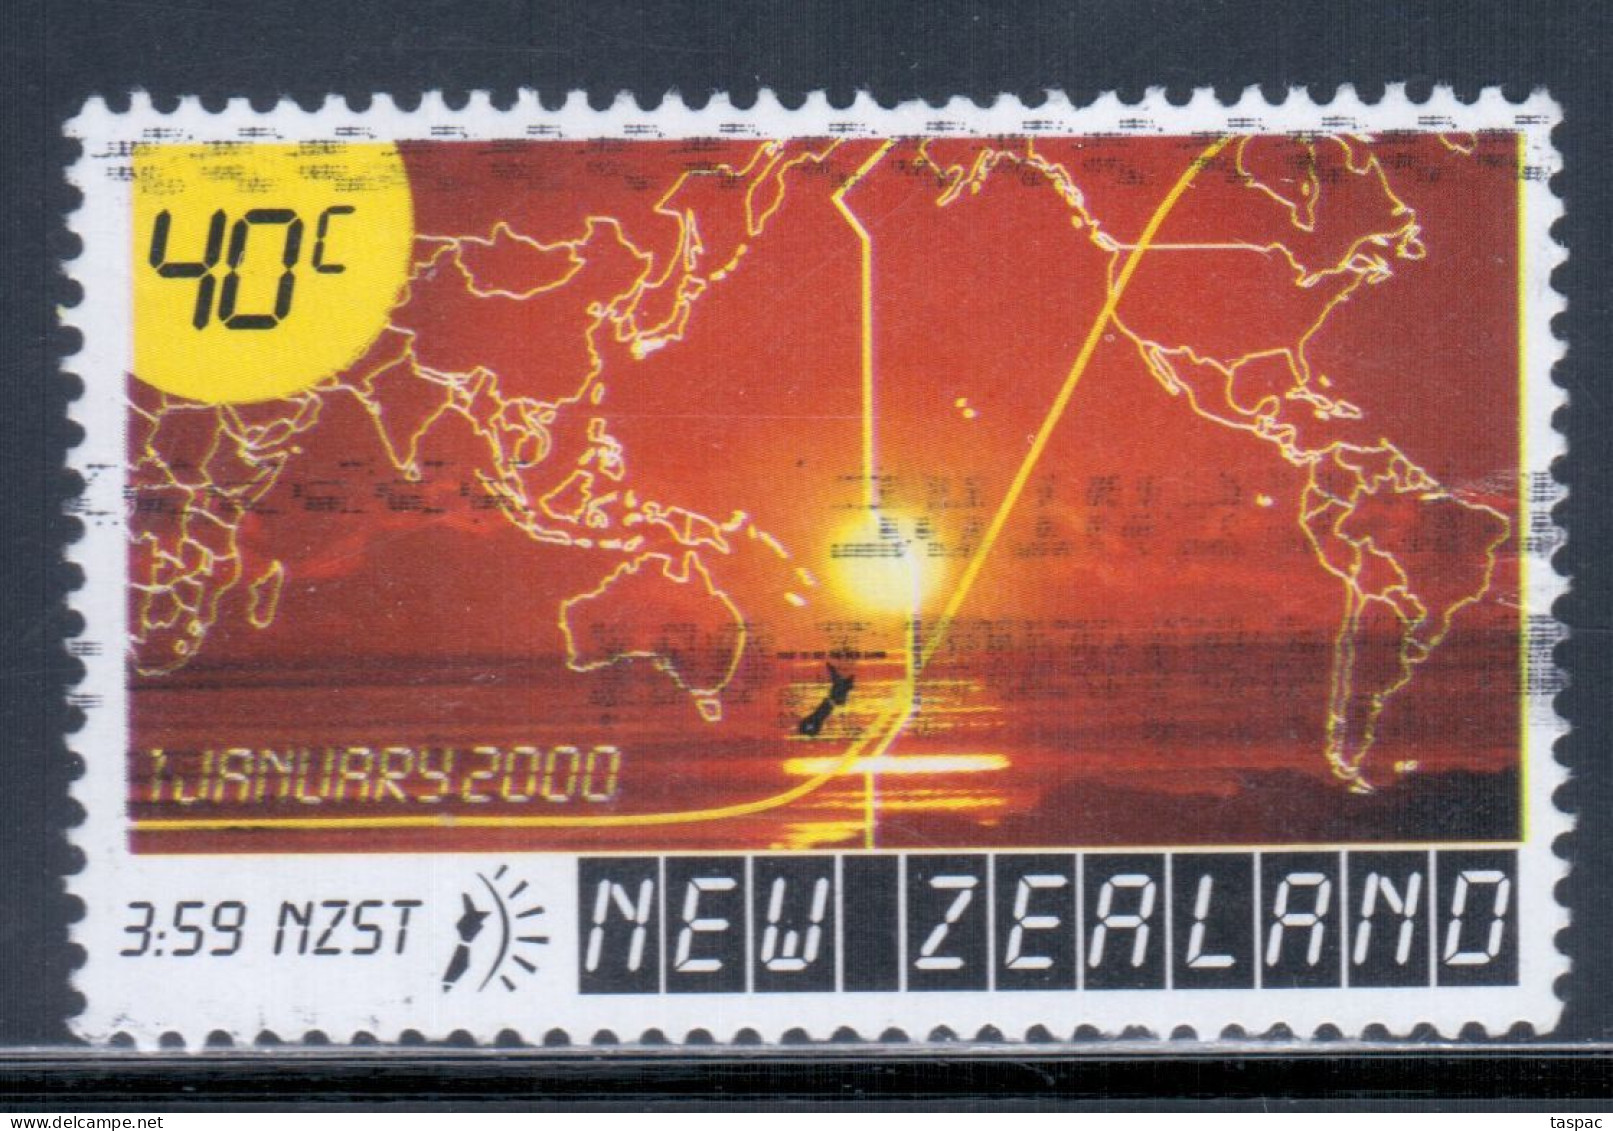 New Zealand 2000 Mi# 1813 Used - First Sunrise Of The New Millennium / Space - Ozeanien